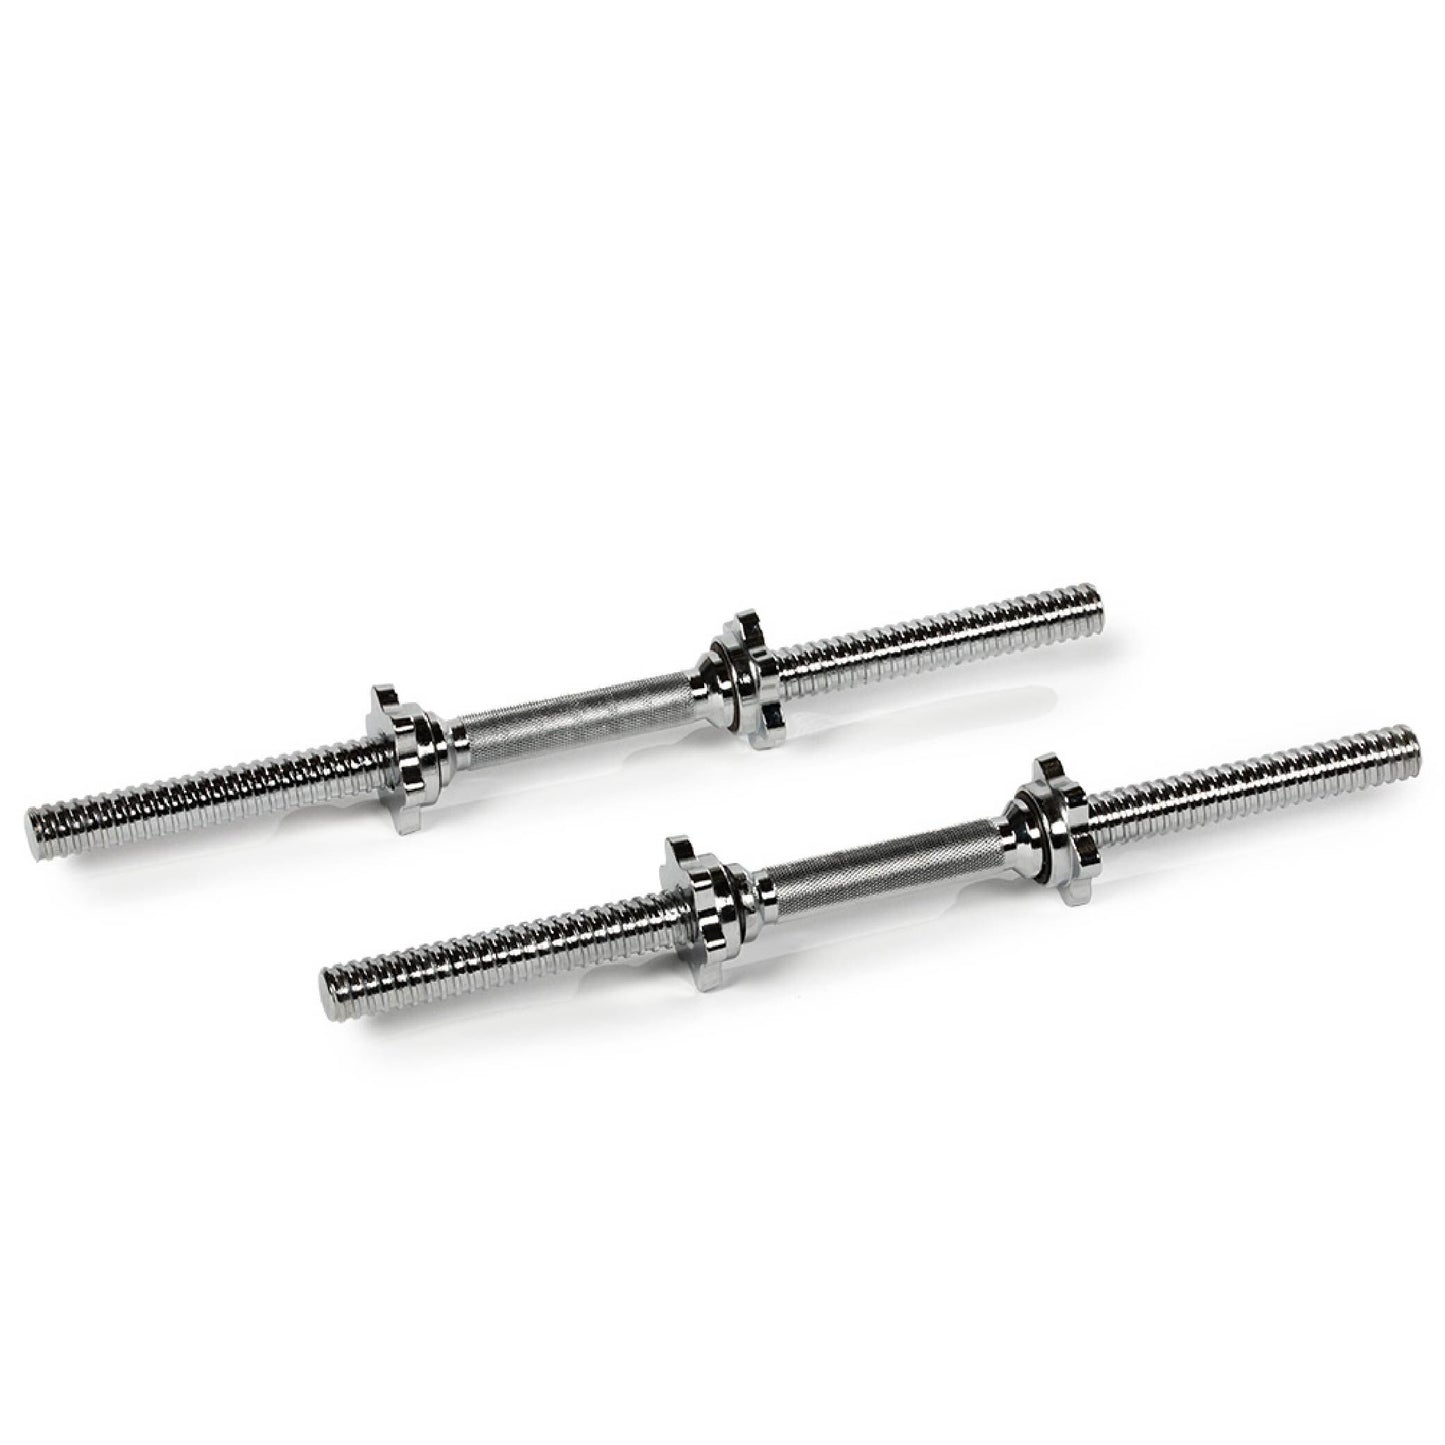 Adjustable 19.5" Thread Dumbbell Handles - view 1